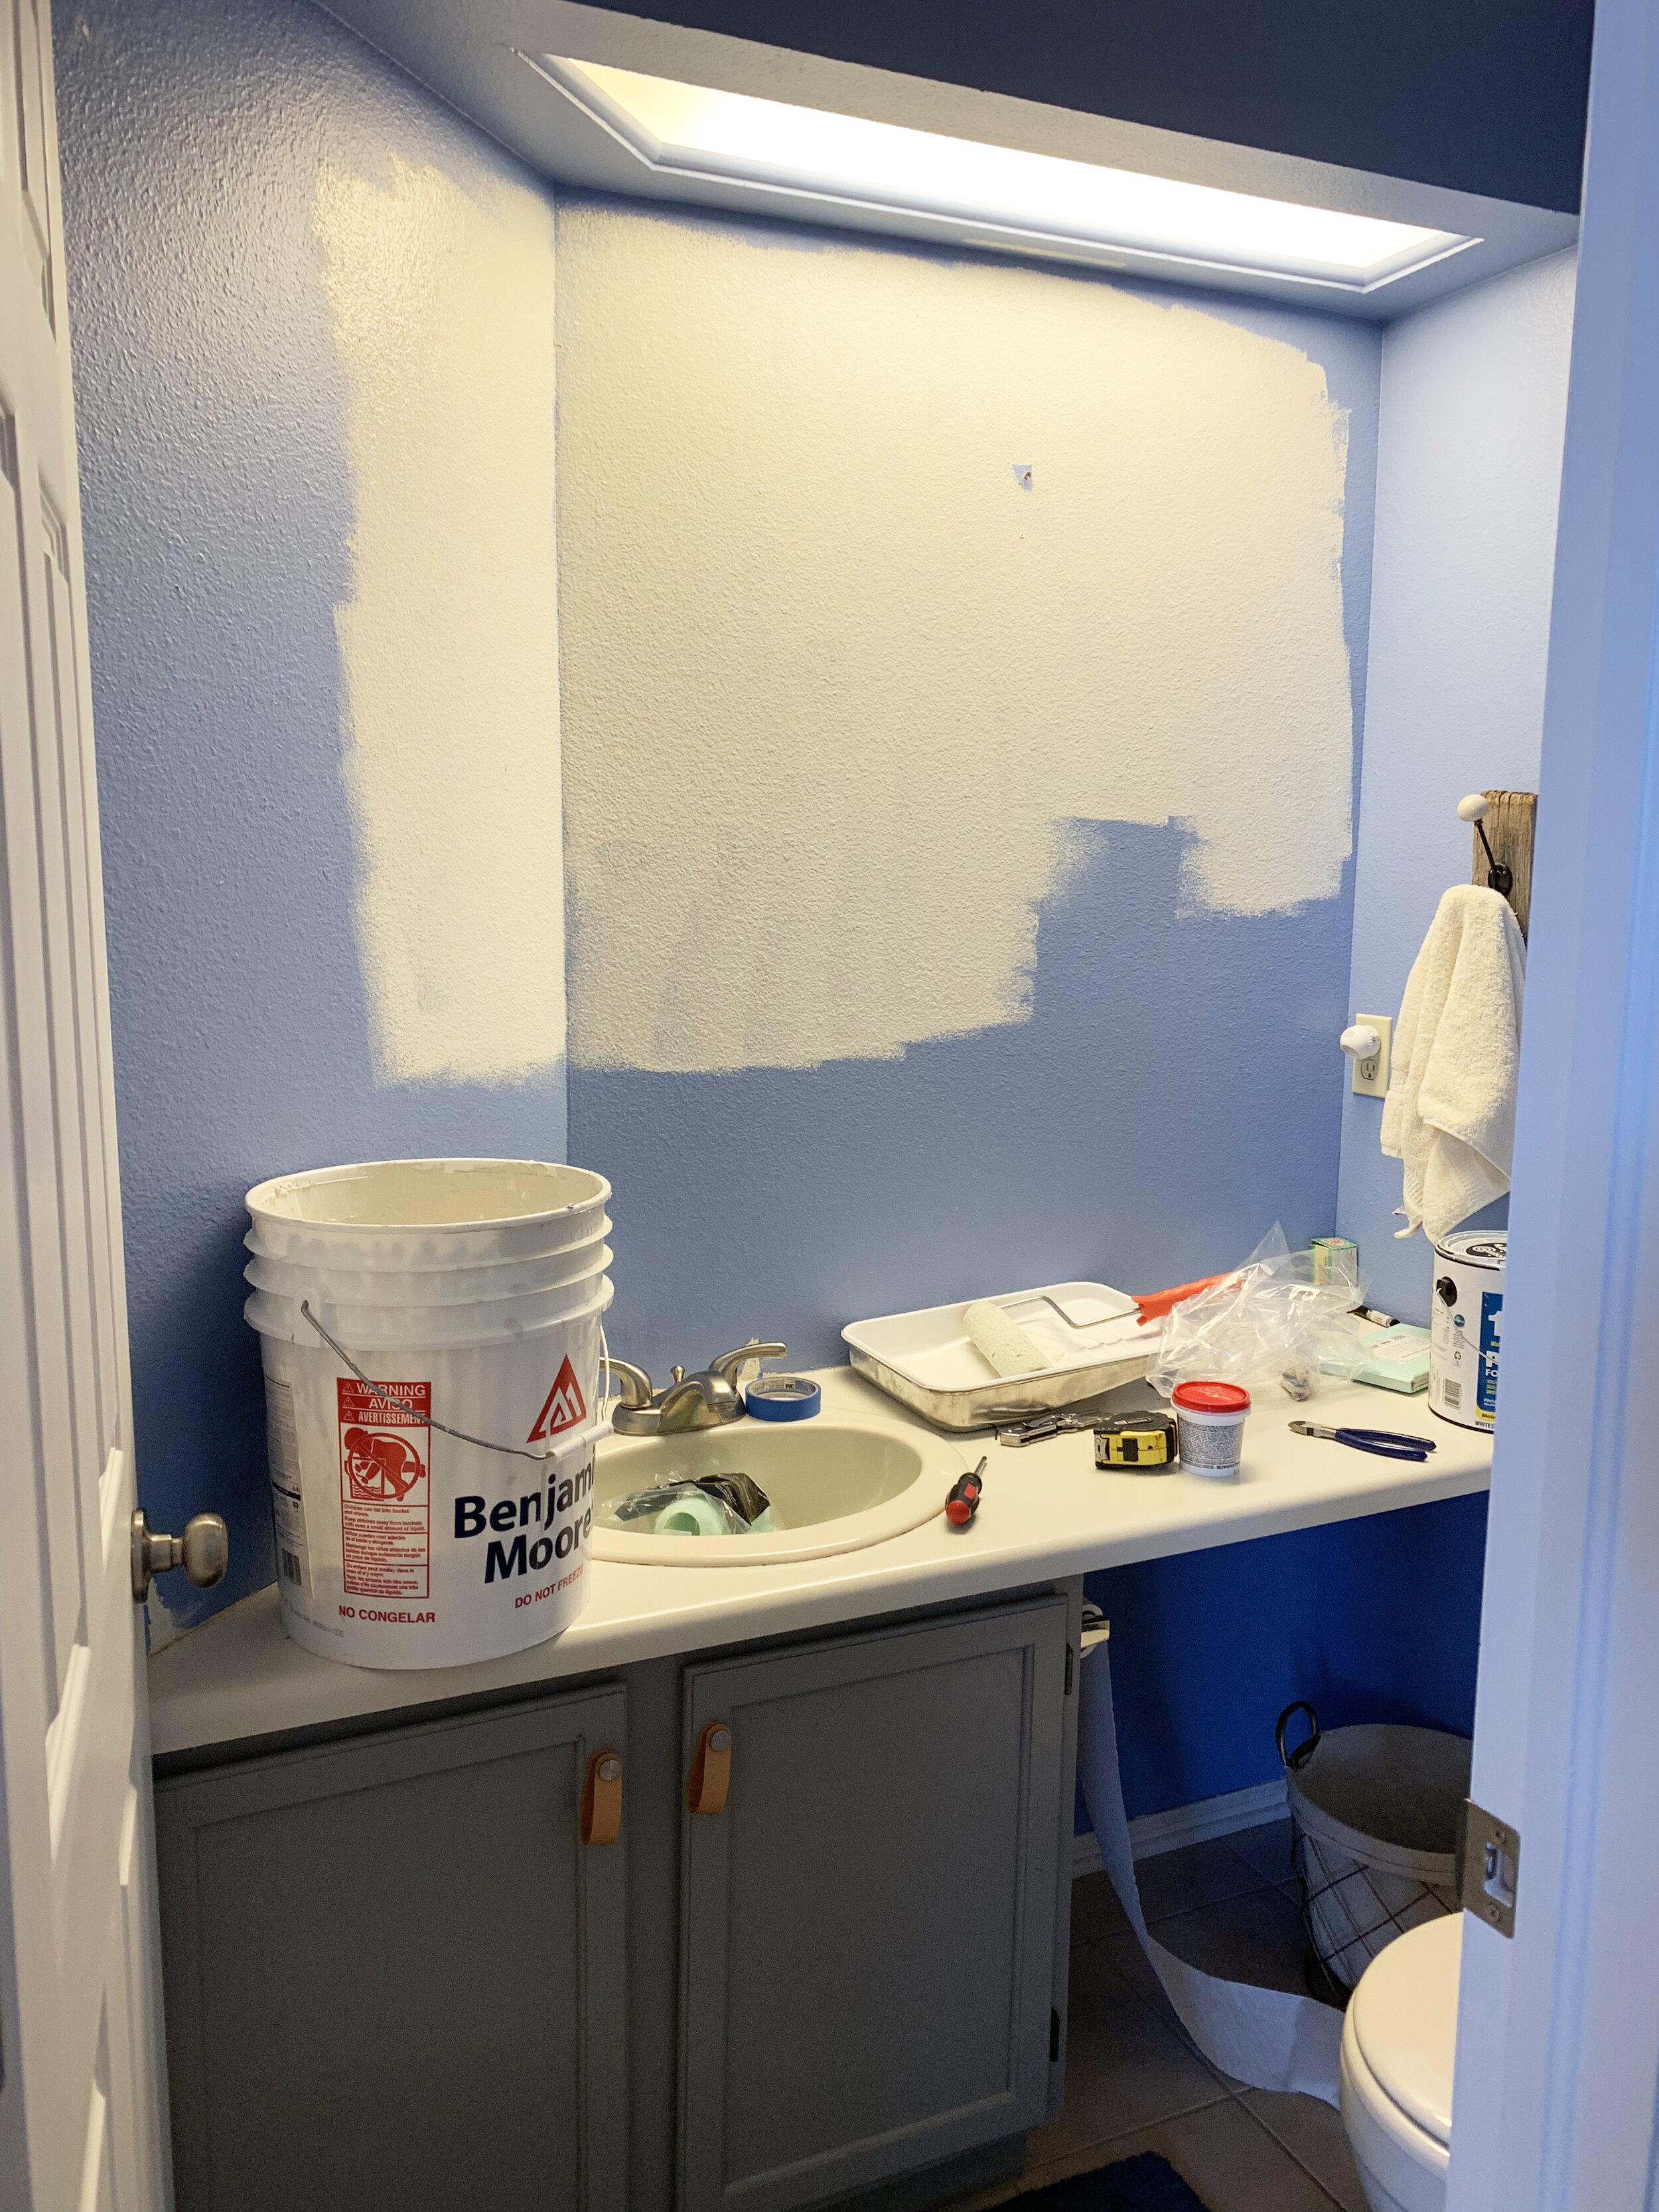  *Breaks out the leftover house paint that the painters left for us - $0  *Runs out of free paint, buys a quart - $23 